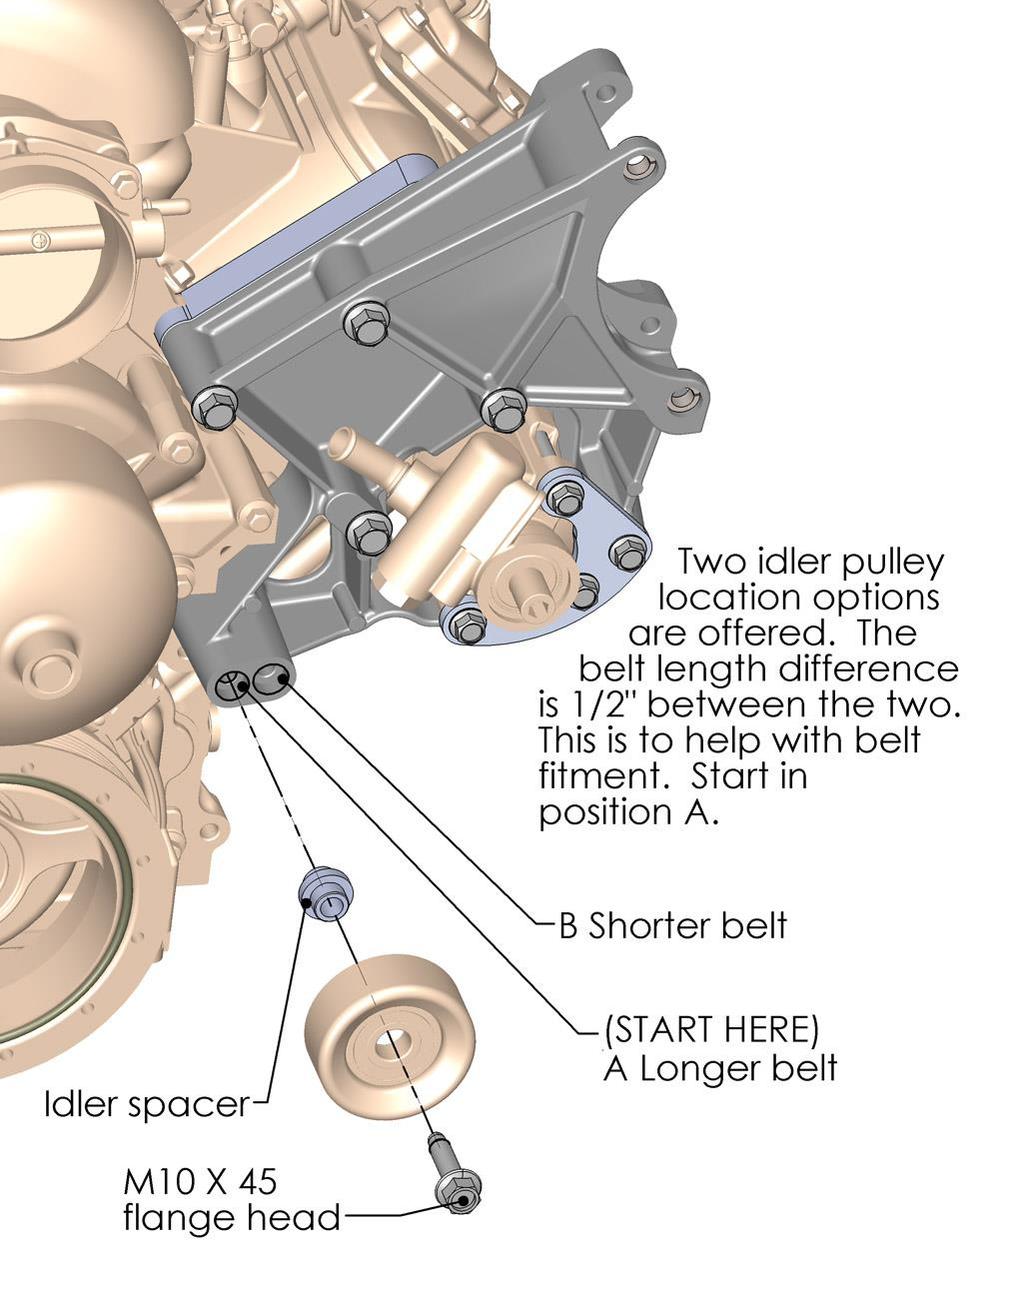 Idler Pulley Installation (position options): NOTE: